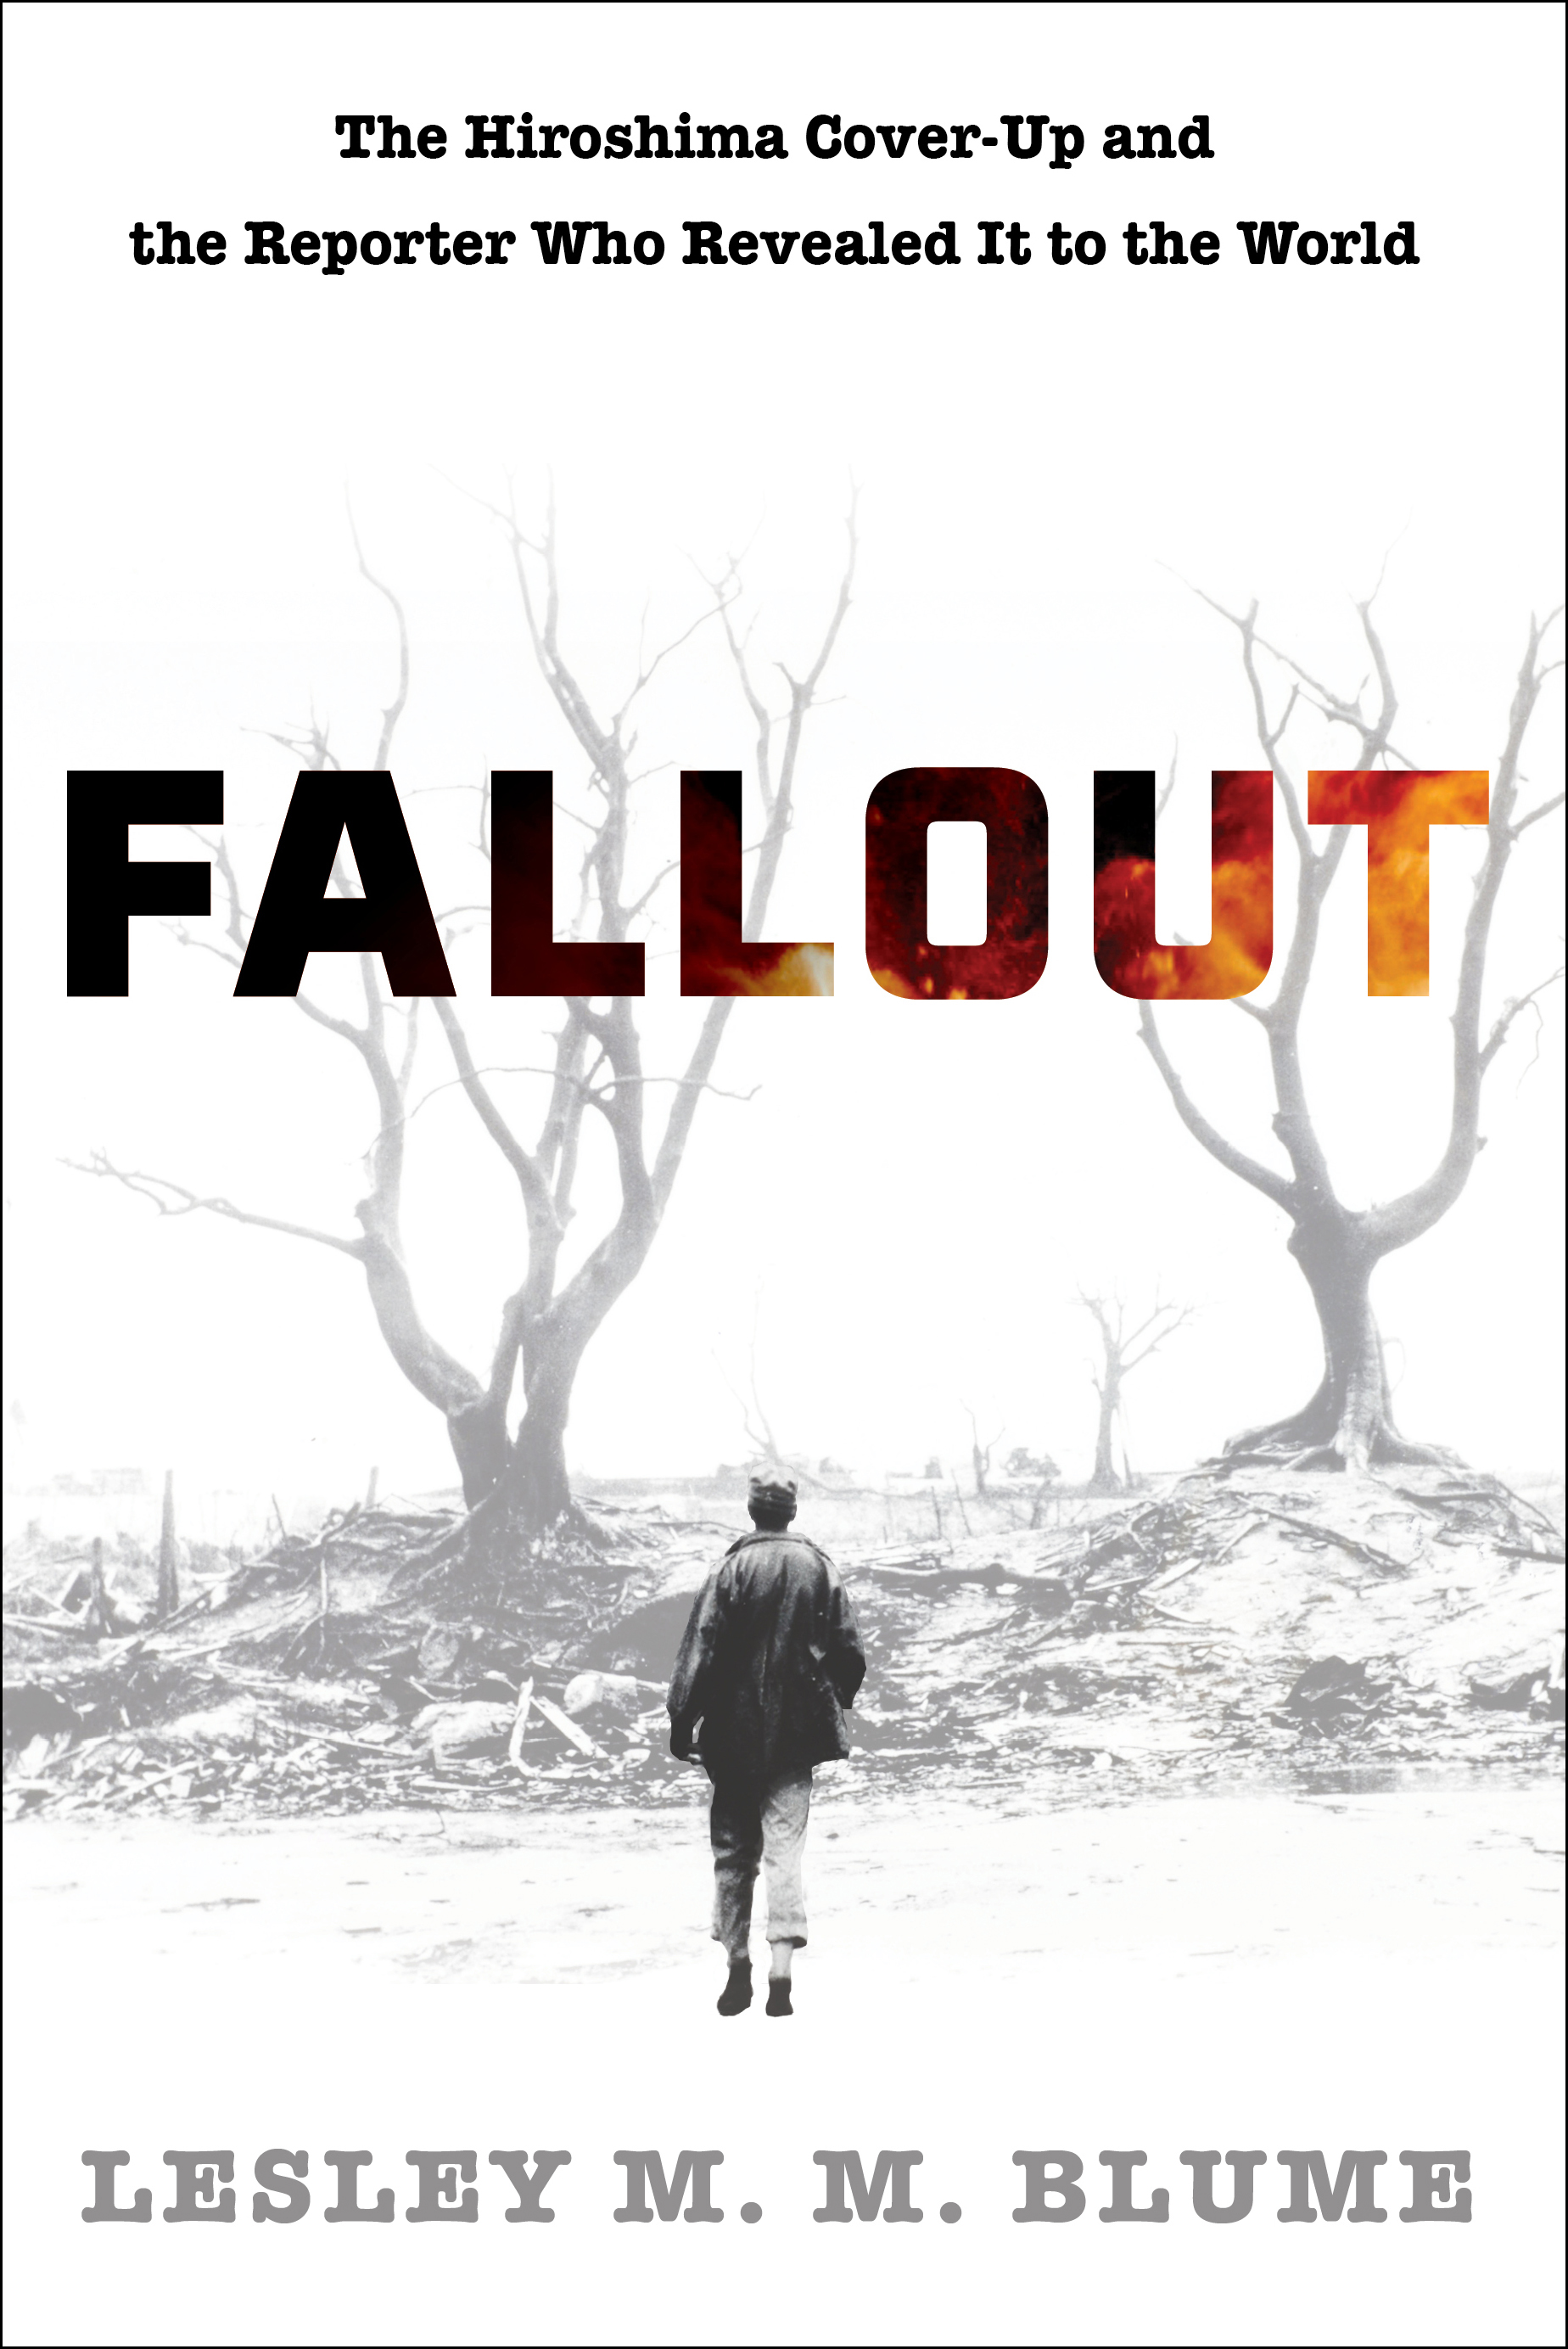 "FALLOUT: The Hiroshima Cover-up and the Reporter Who Revealed It to the World"